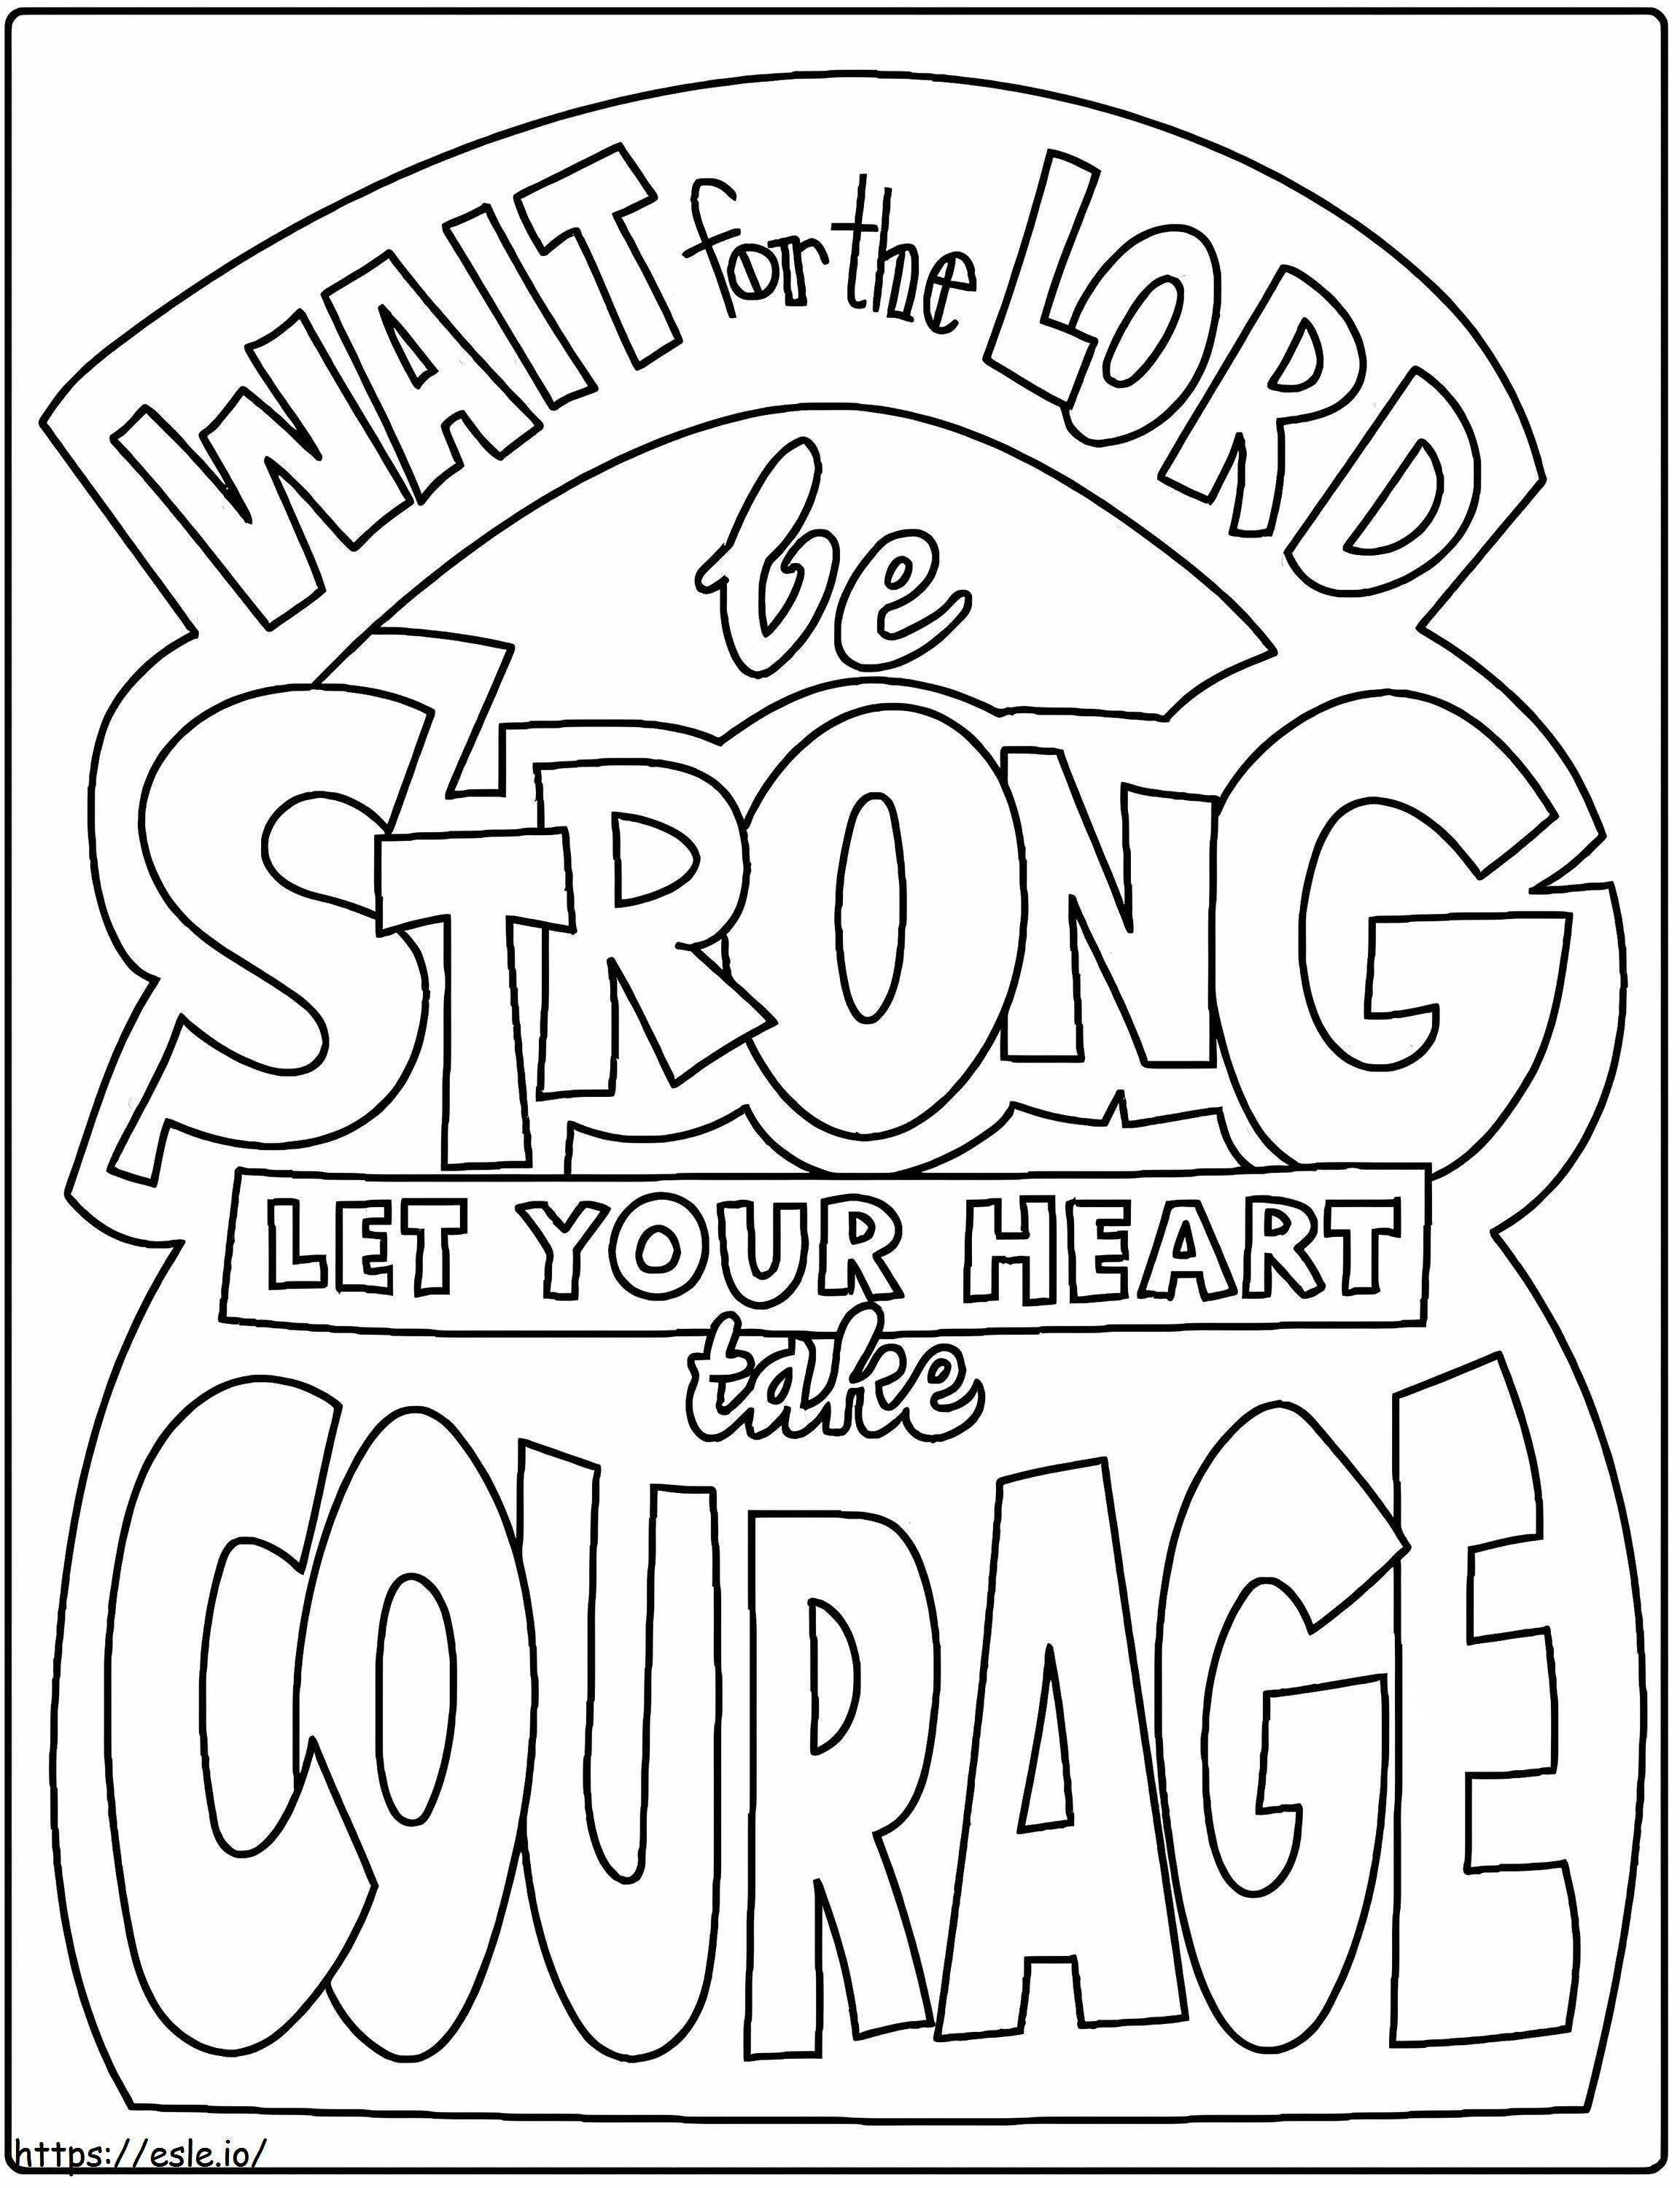 Let Your Heart Take Courage coloring page